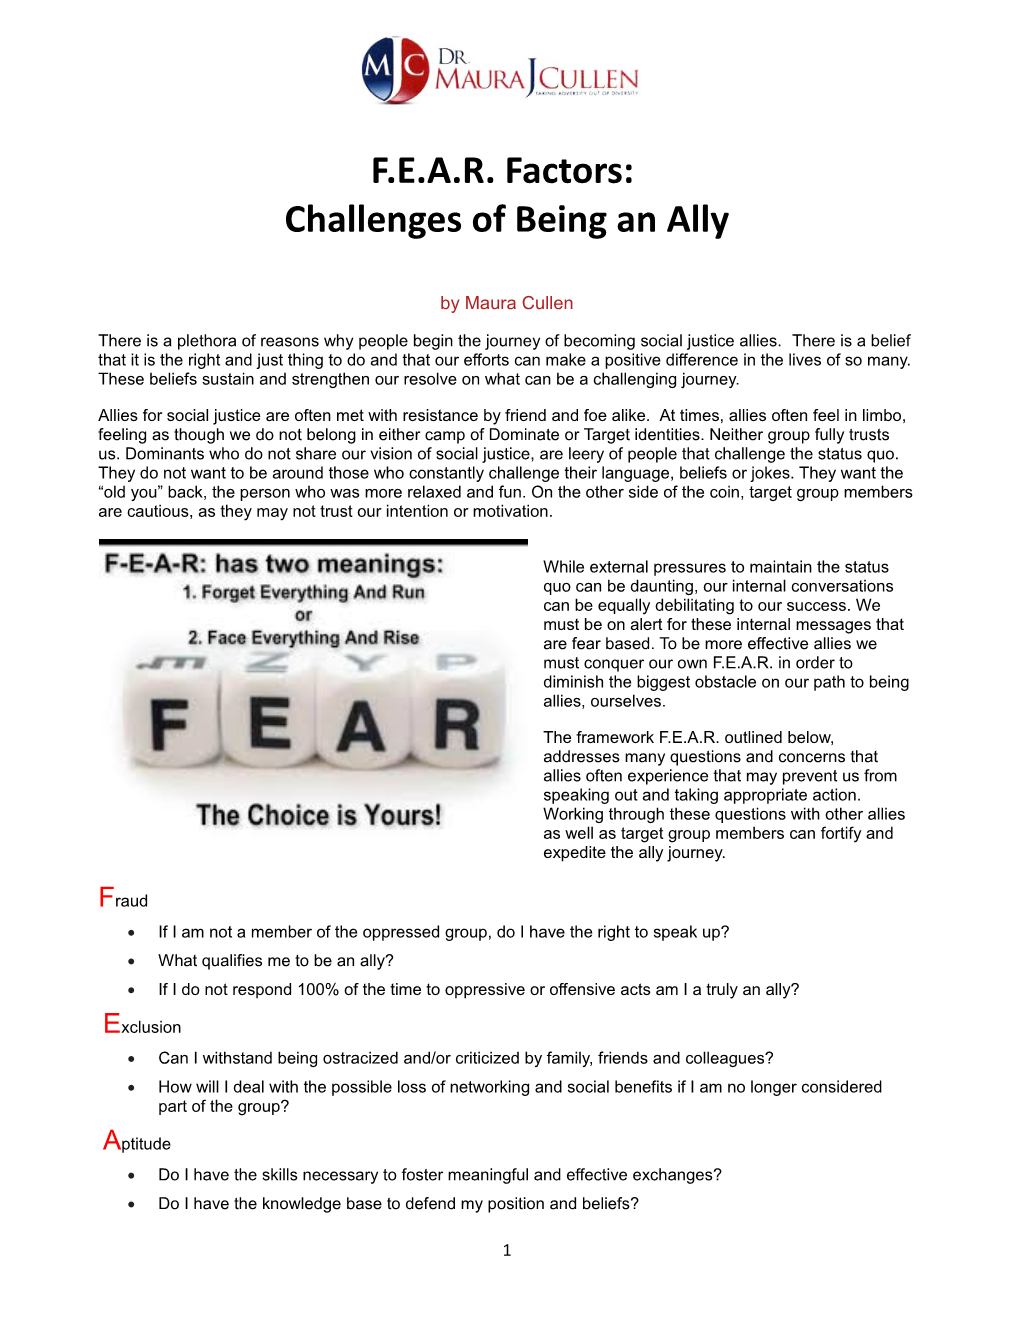 F.E.A.R. Factors: Challenges of Being an Ally Page 2/2